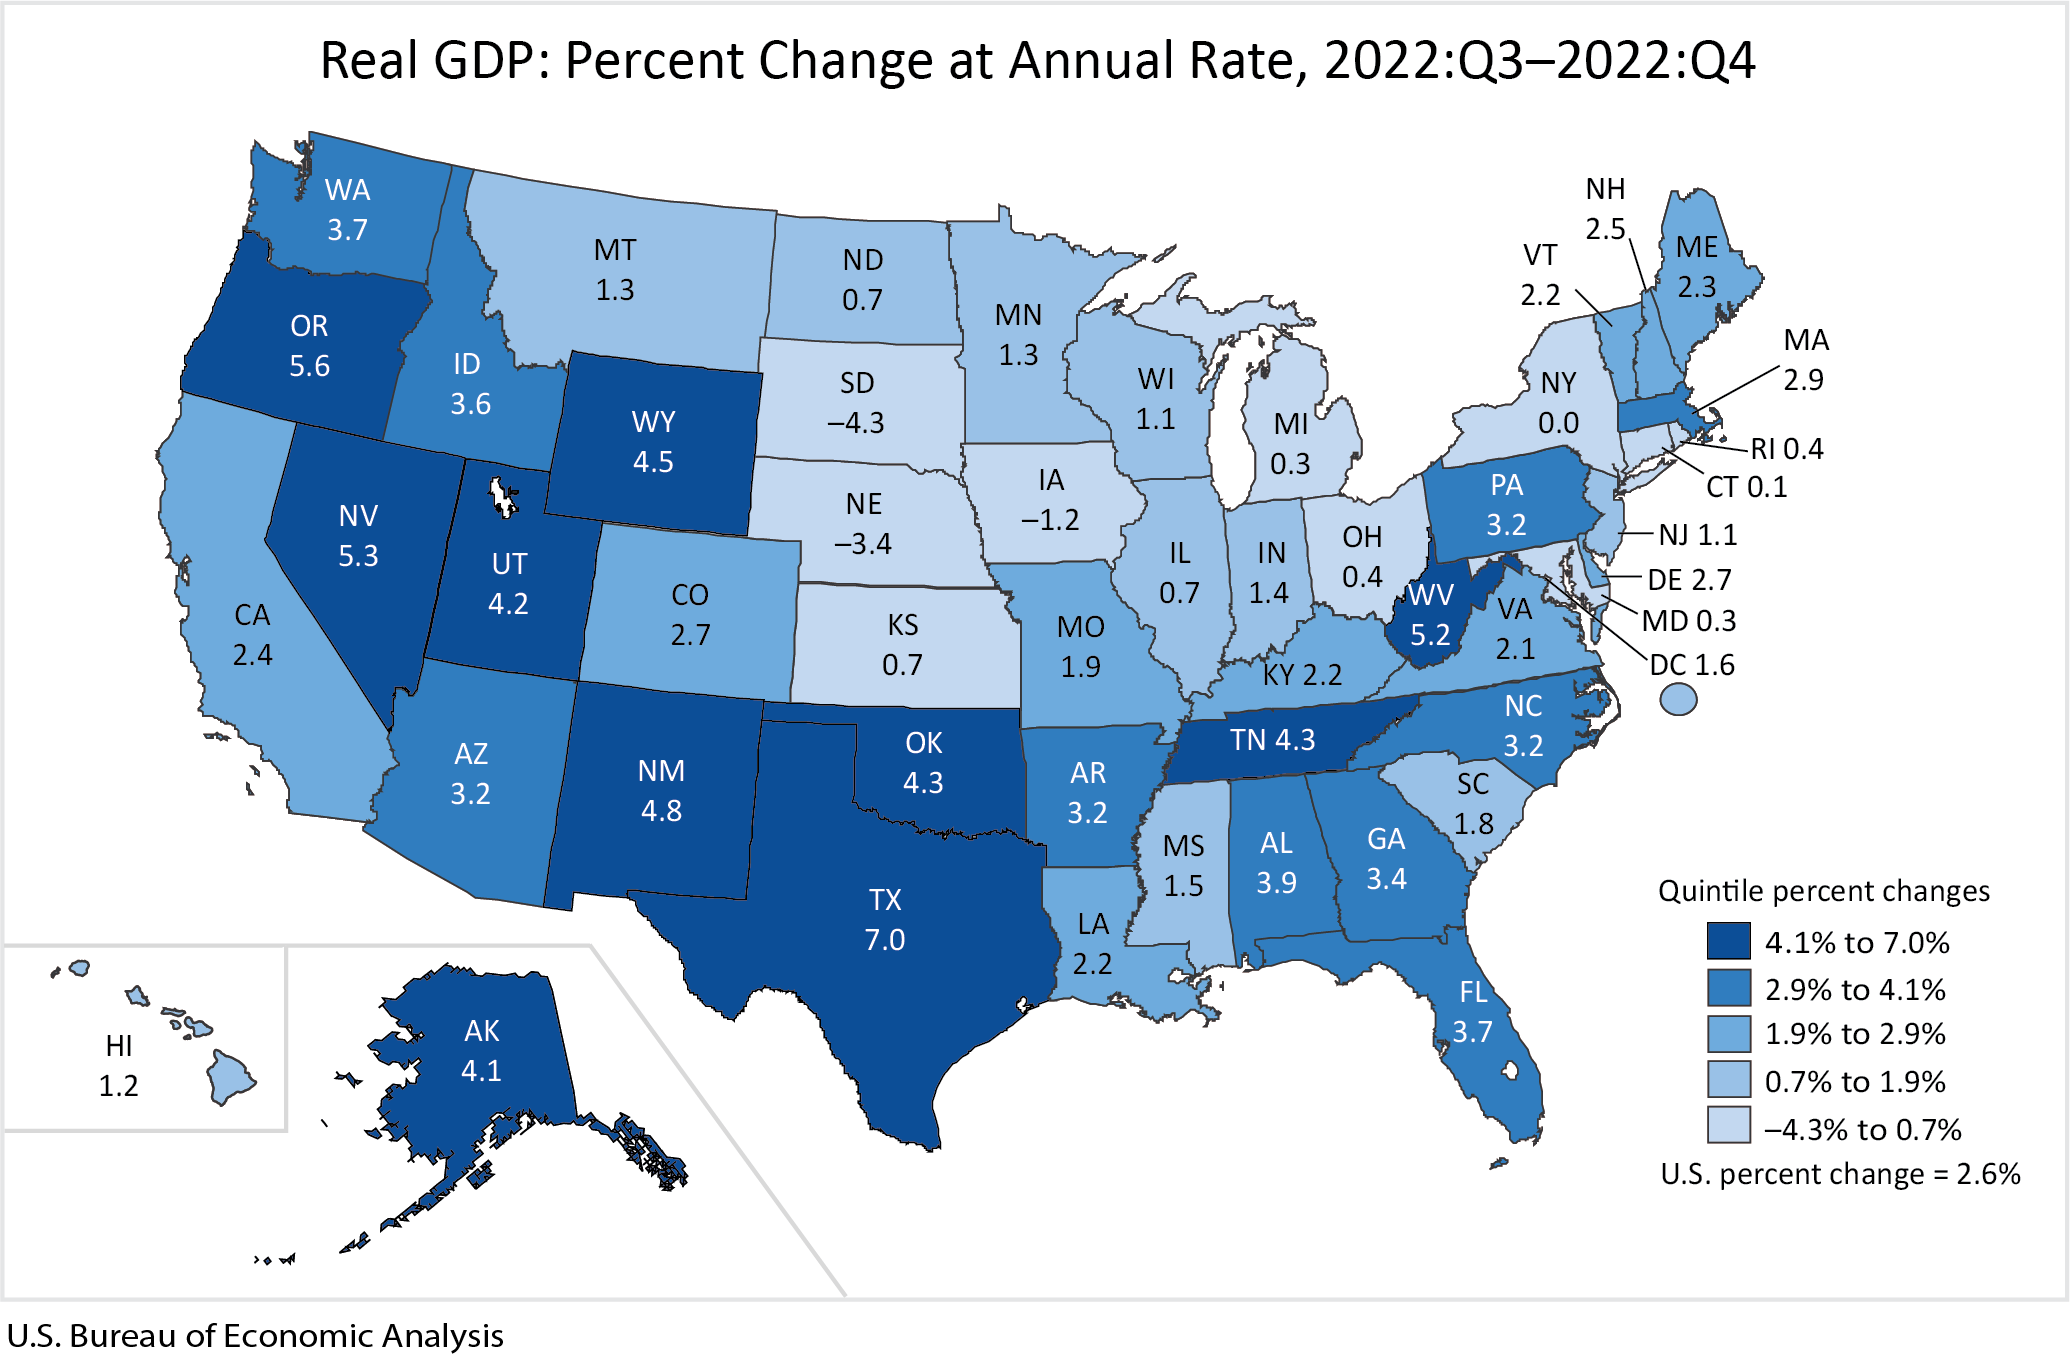 Real GDP: Percent Change at Annual Rate, 2022:Q3-2022:Q4